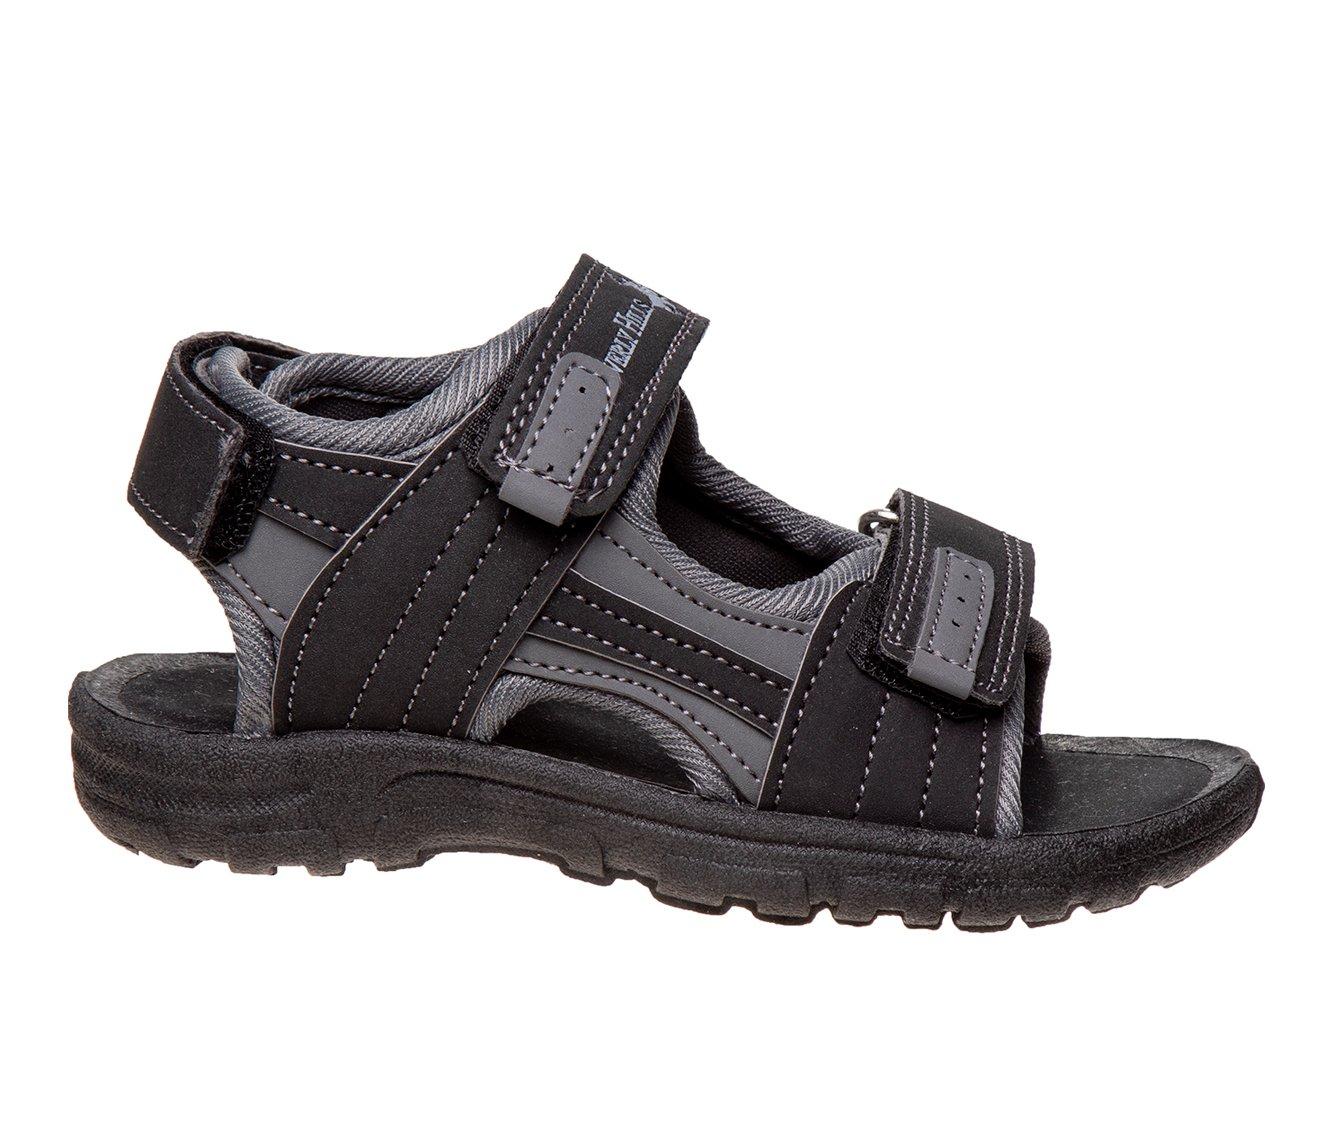 Boys' Beverly Hills Polo Club Toddler Open Toe Sport Outdoor Sandals